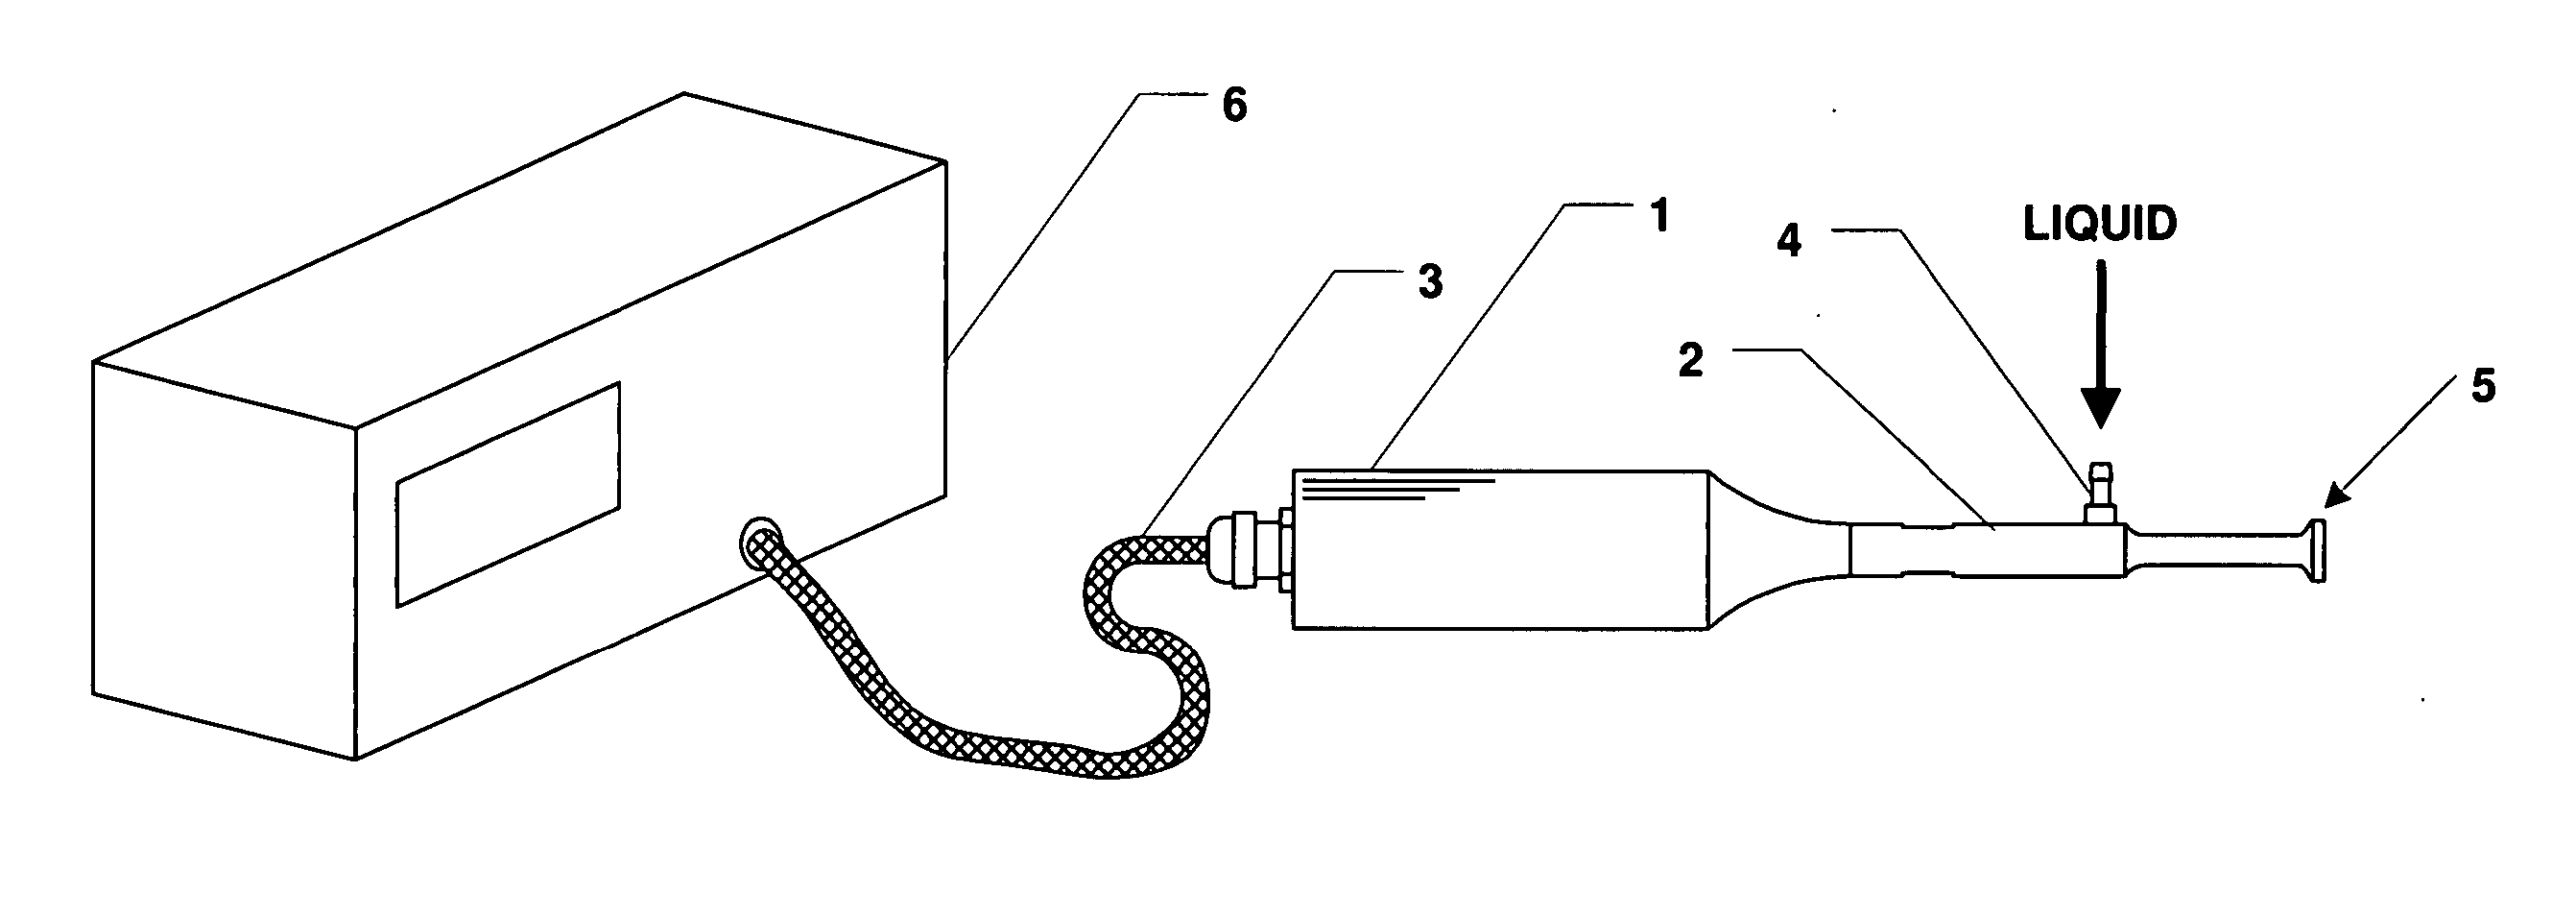 Apparatus and methods for the treatment of avian influenza with ultrasound